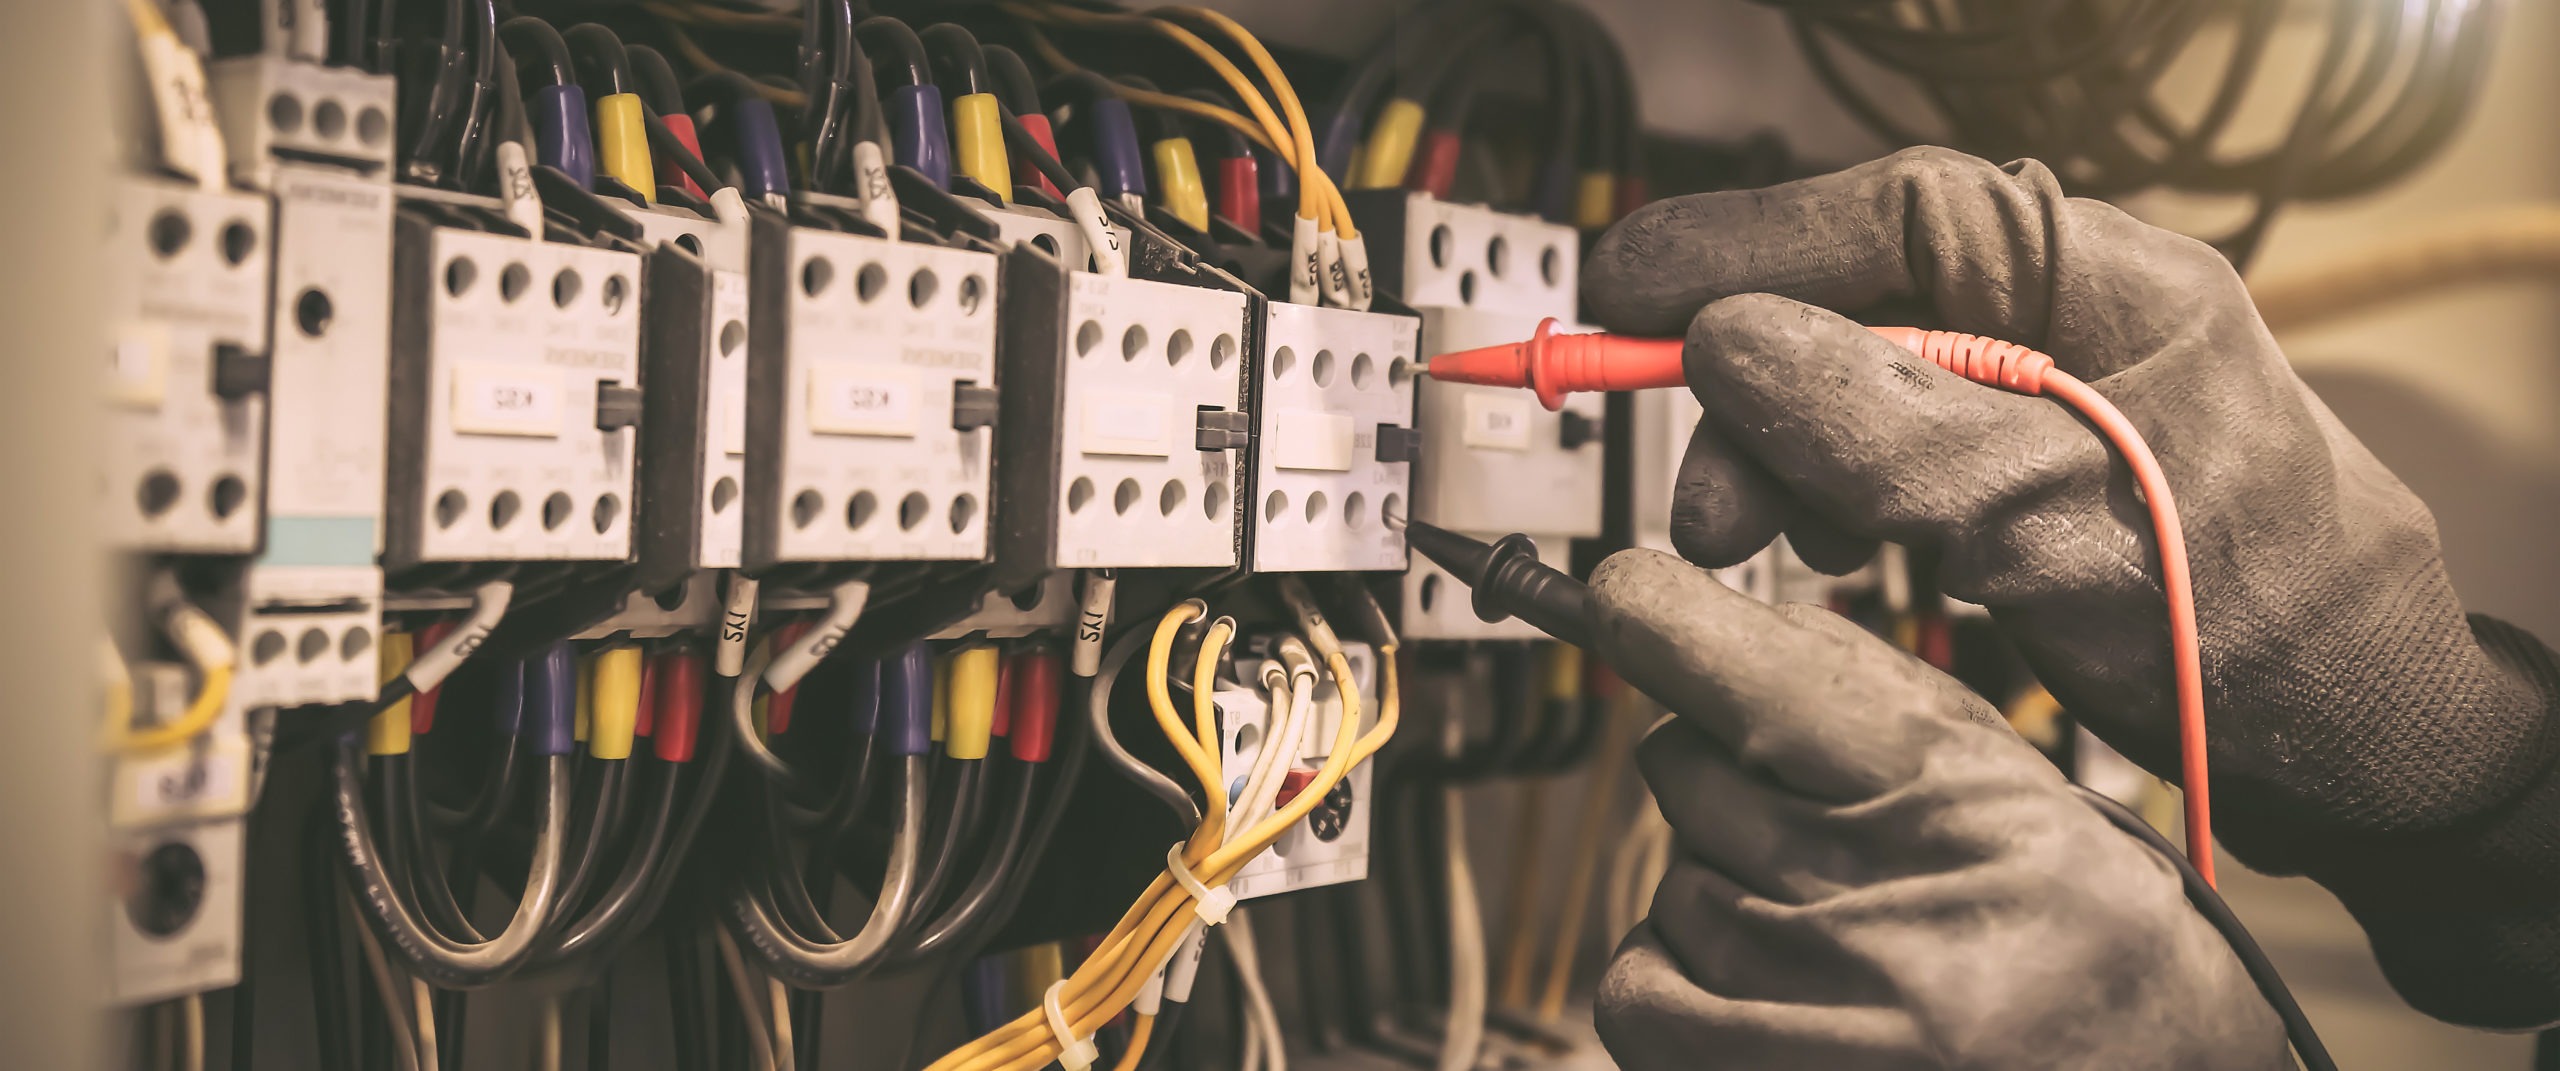 Electrical engineer using digital multi-meter measuring equipment to checking electric current voltage at circuit breaker in main power distribution board.